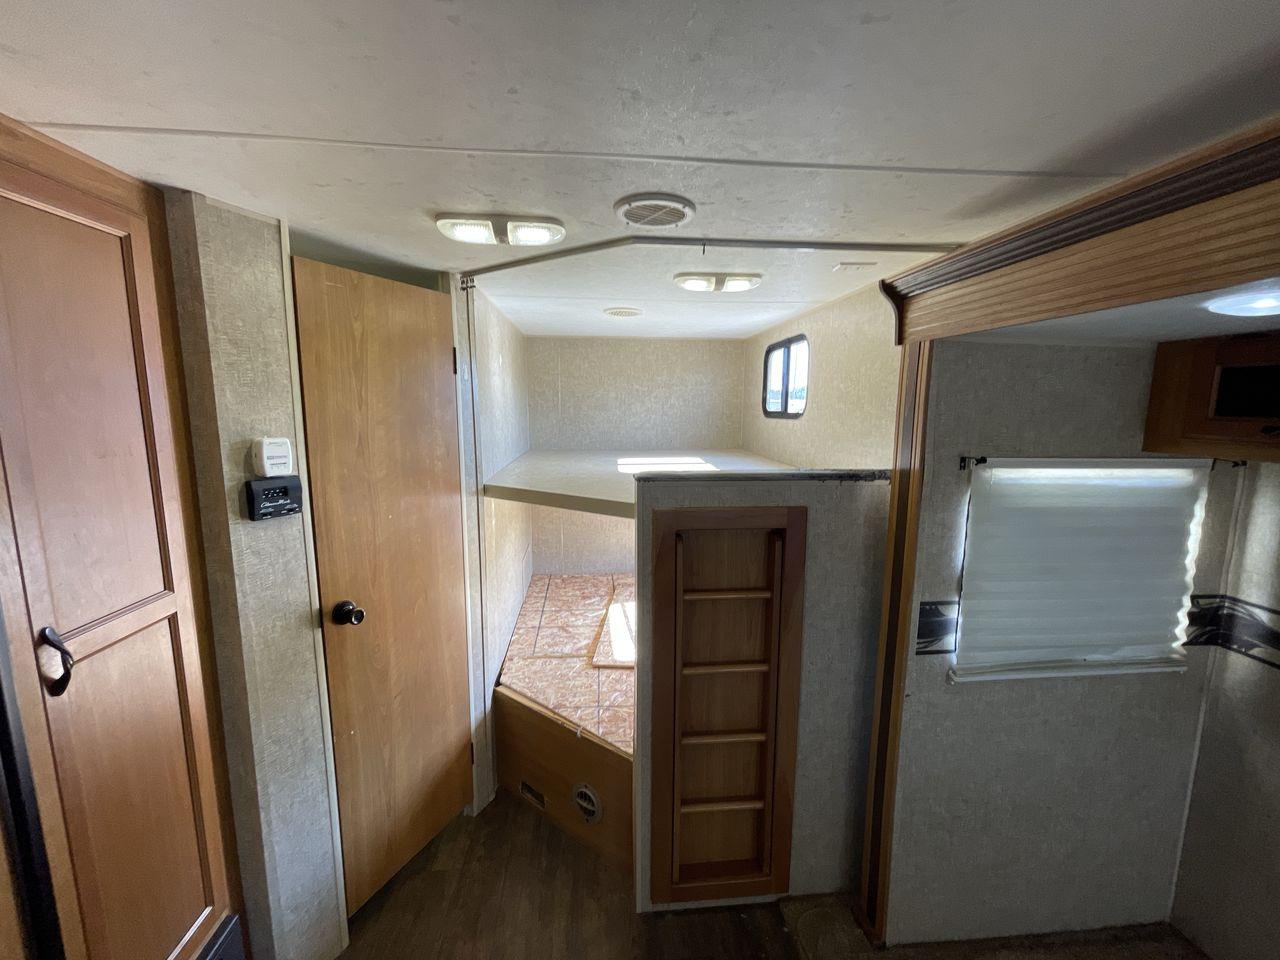 2014 BEIGE KZRV SPREE 282BHS (4EZTL2826E8) , Length: 31.33 ft. | Dry Weight: 5,610 lbs. | Gross Weight: 6,800 lbs. | Slides: 1 transmission, located at 4319 N Main St, Cleburne, TX, 76033, (817) 678-5133, 32.385960, -97.391212 - Photo #19